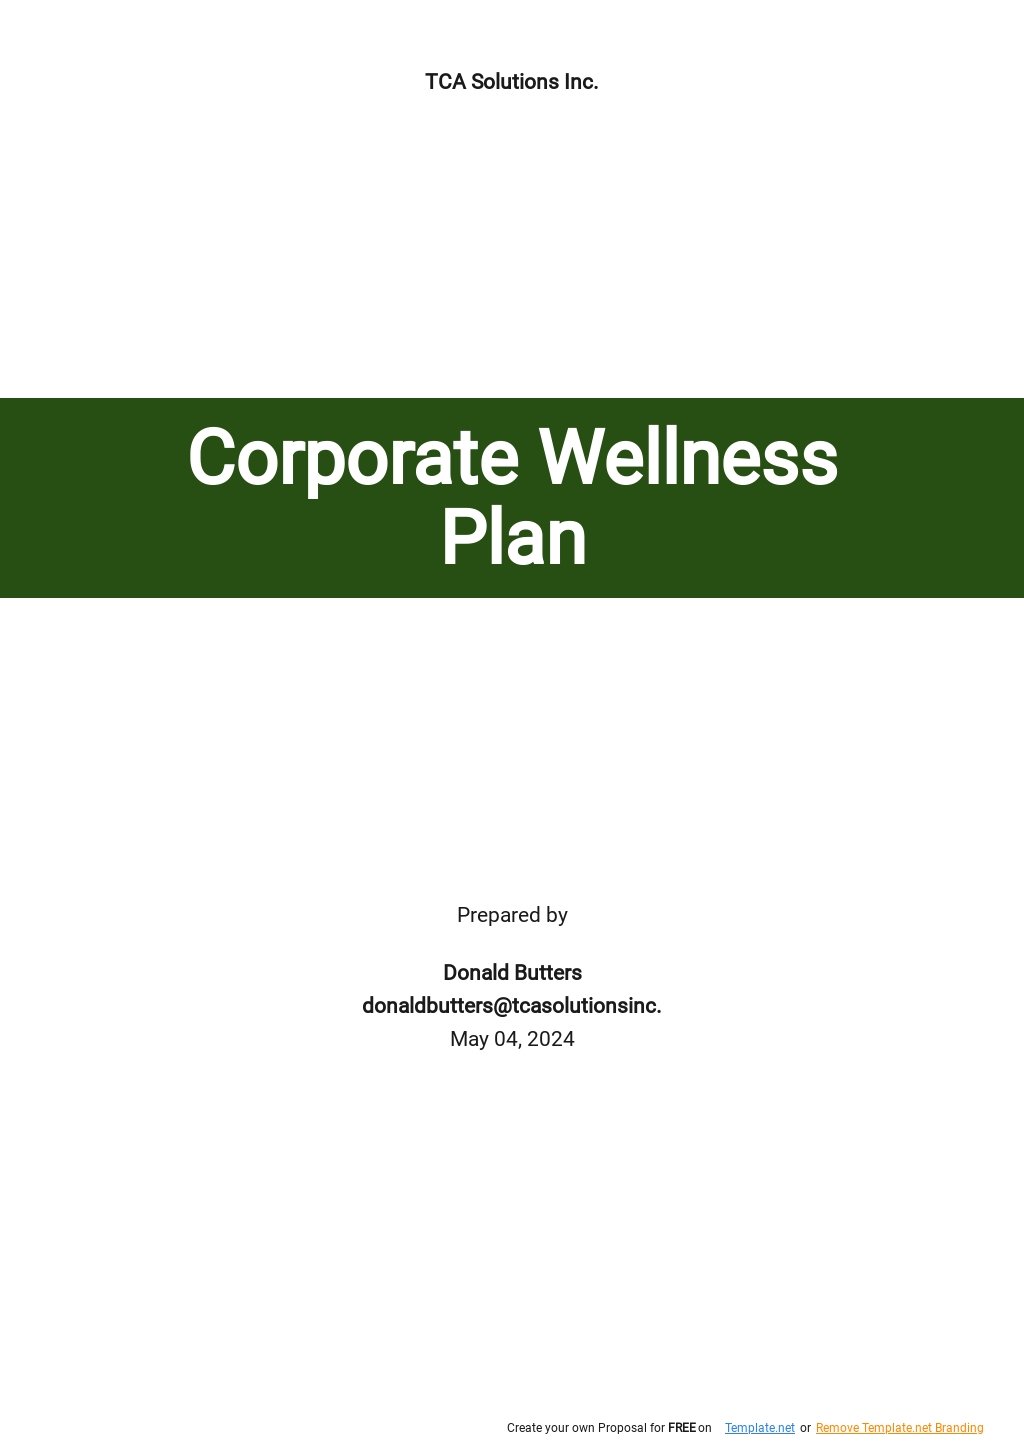 corporate health plan meaning